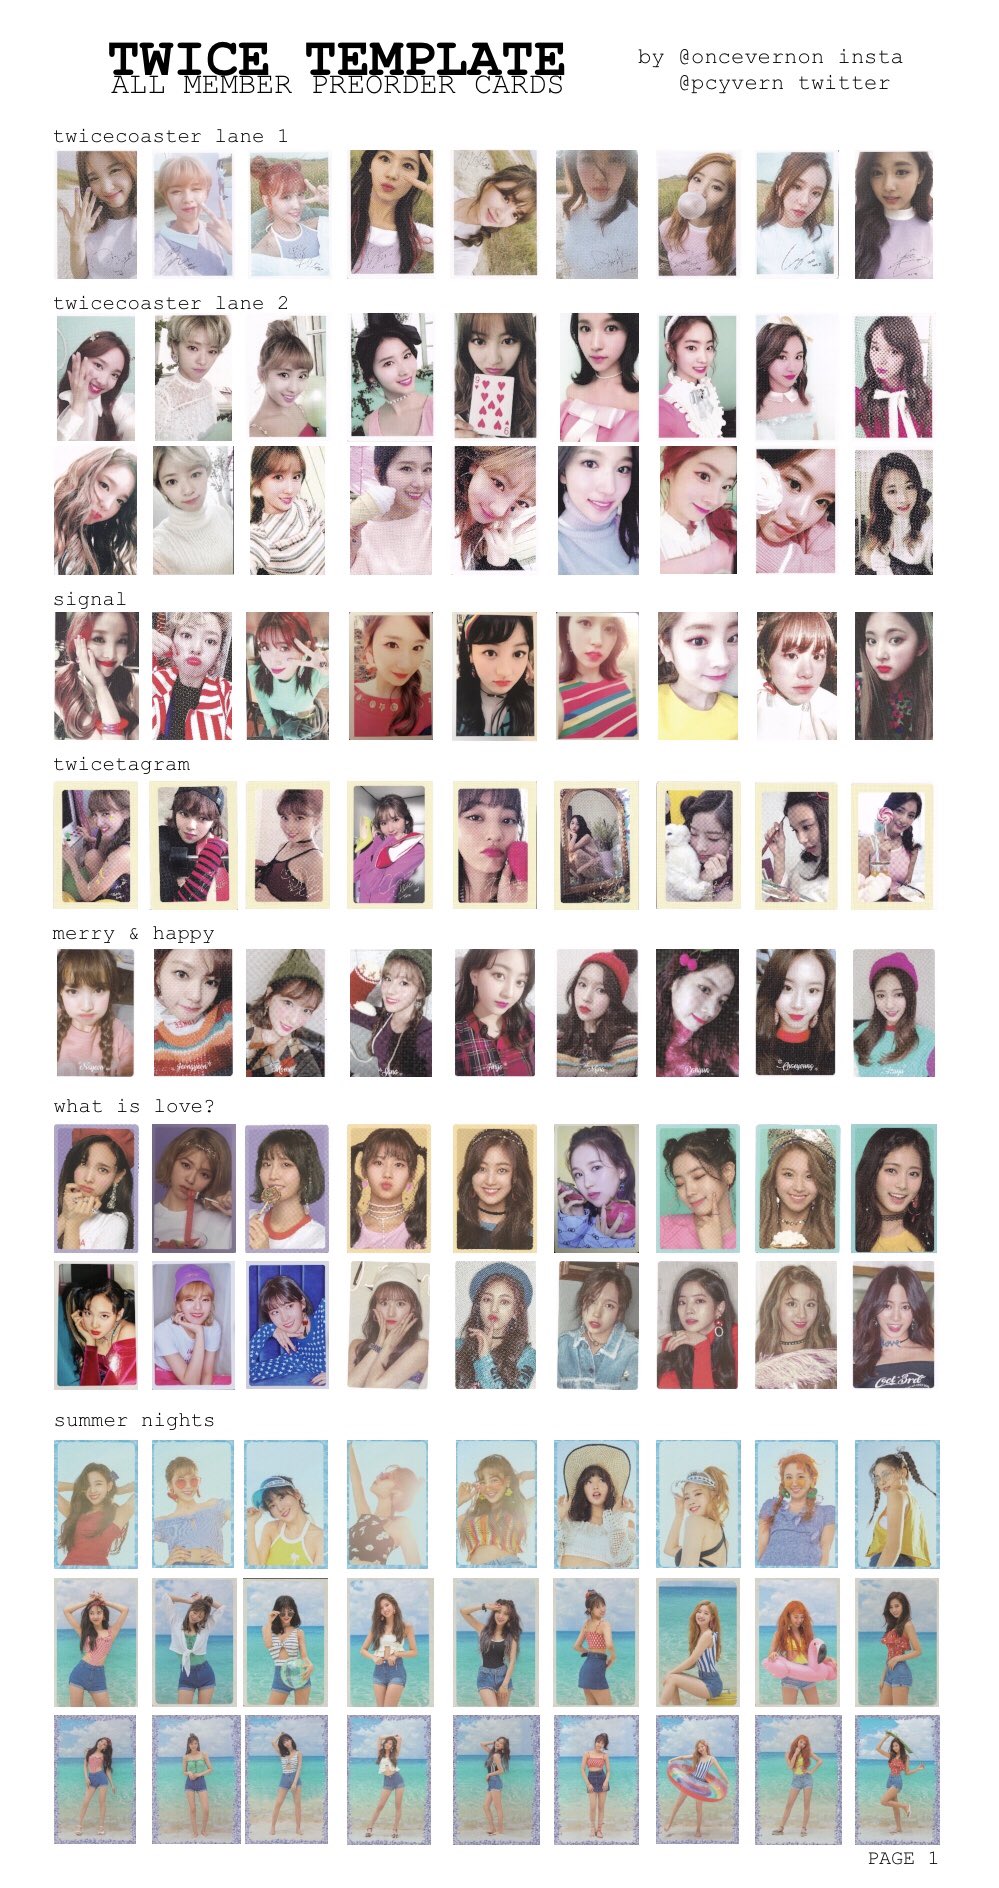 bella on Twitter "all twice members preorder cards template https//t